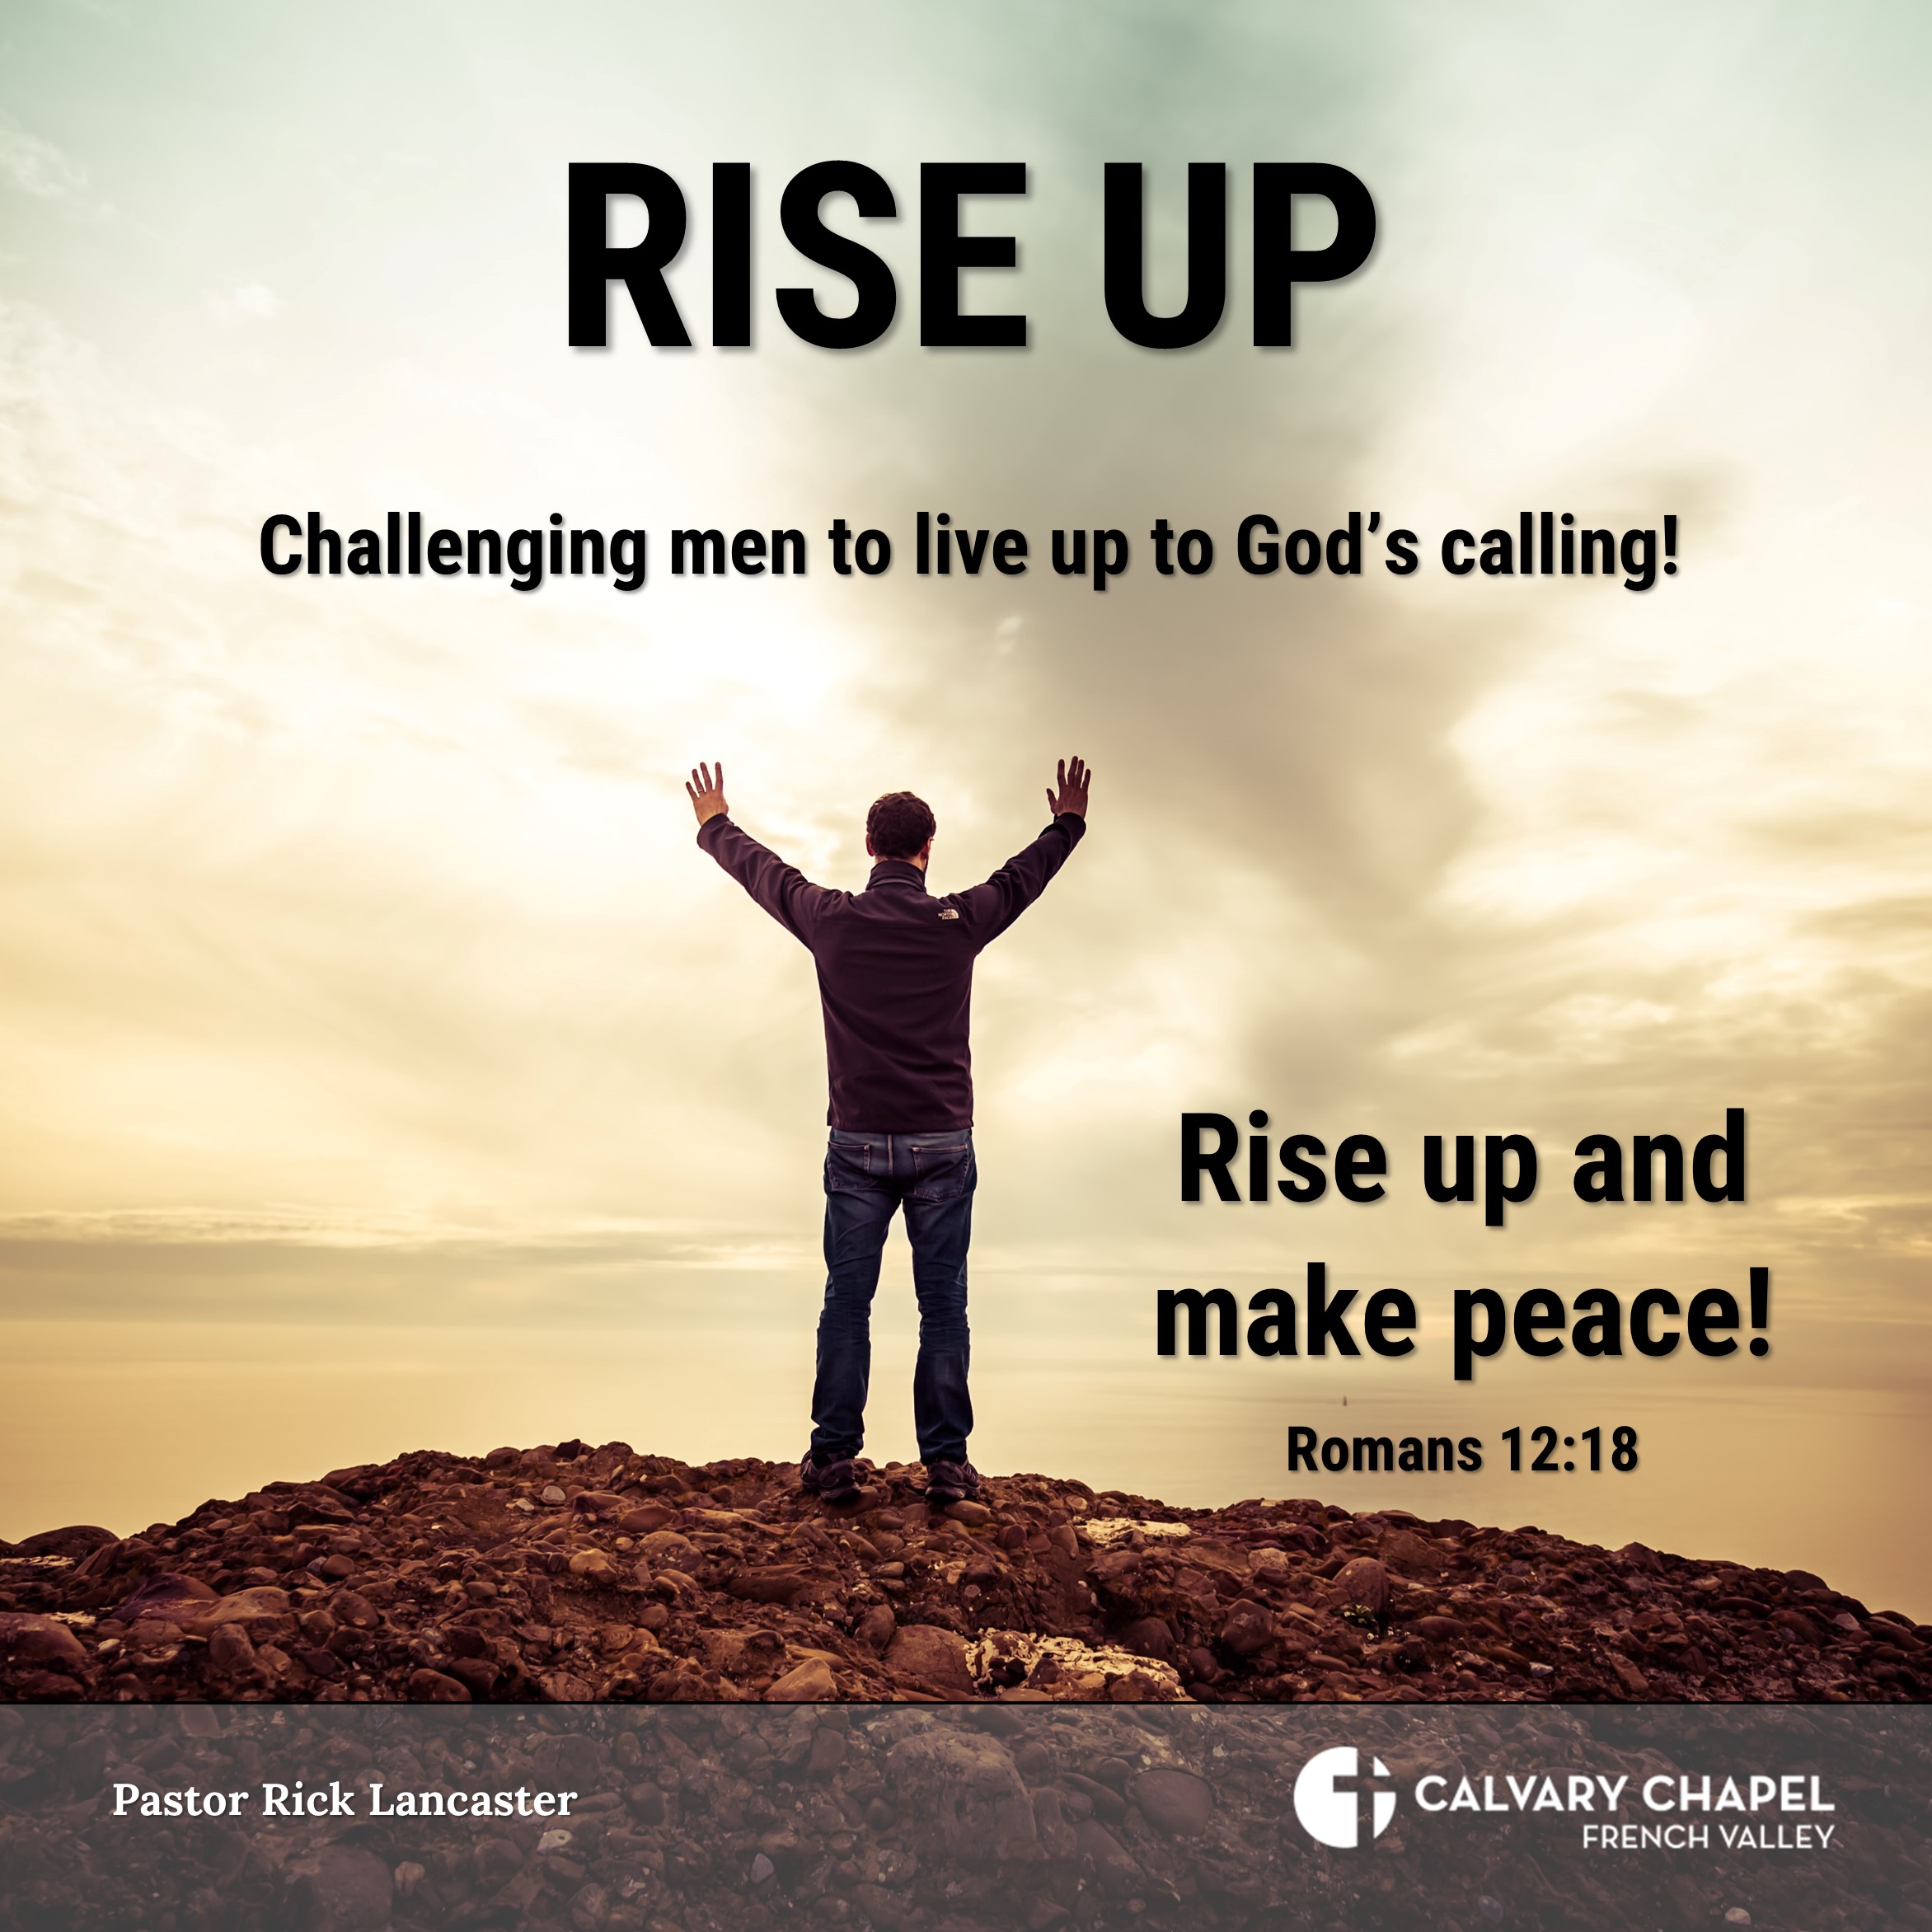 Rise up and make peace! Romans 12:18 - Men's Breakfast – December 16, 2023 - RISE UP: Challenging men to live up to God’s calling!